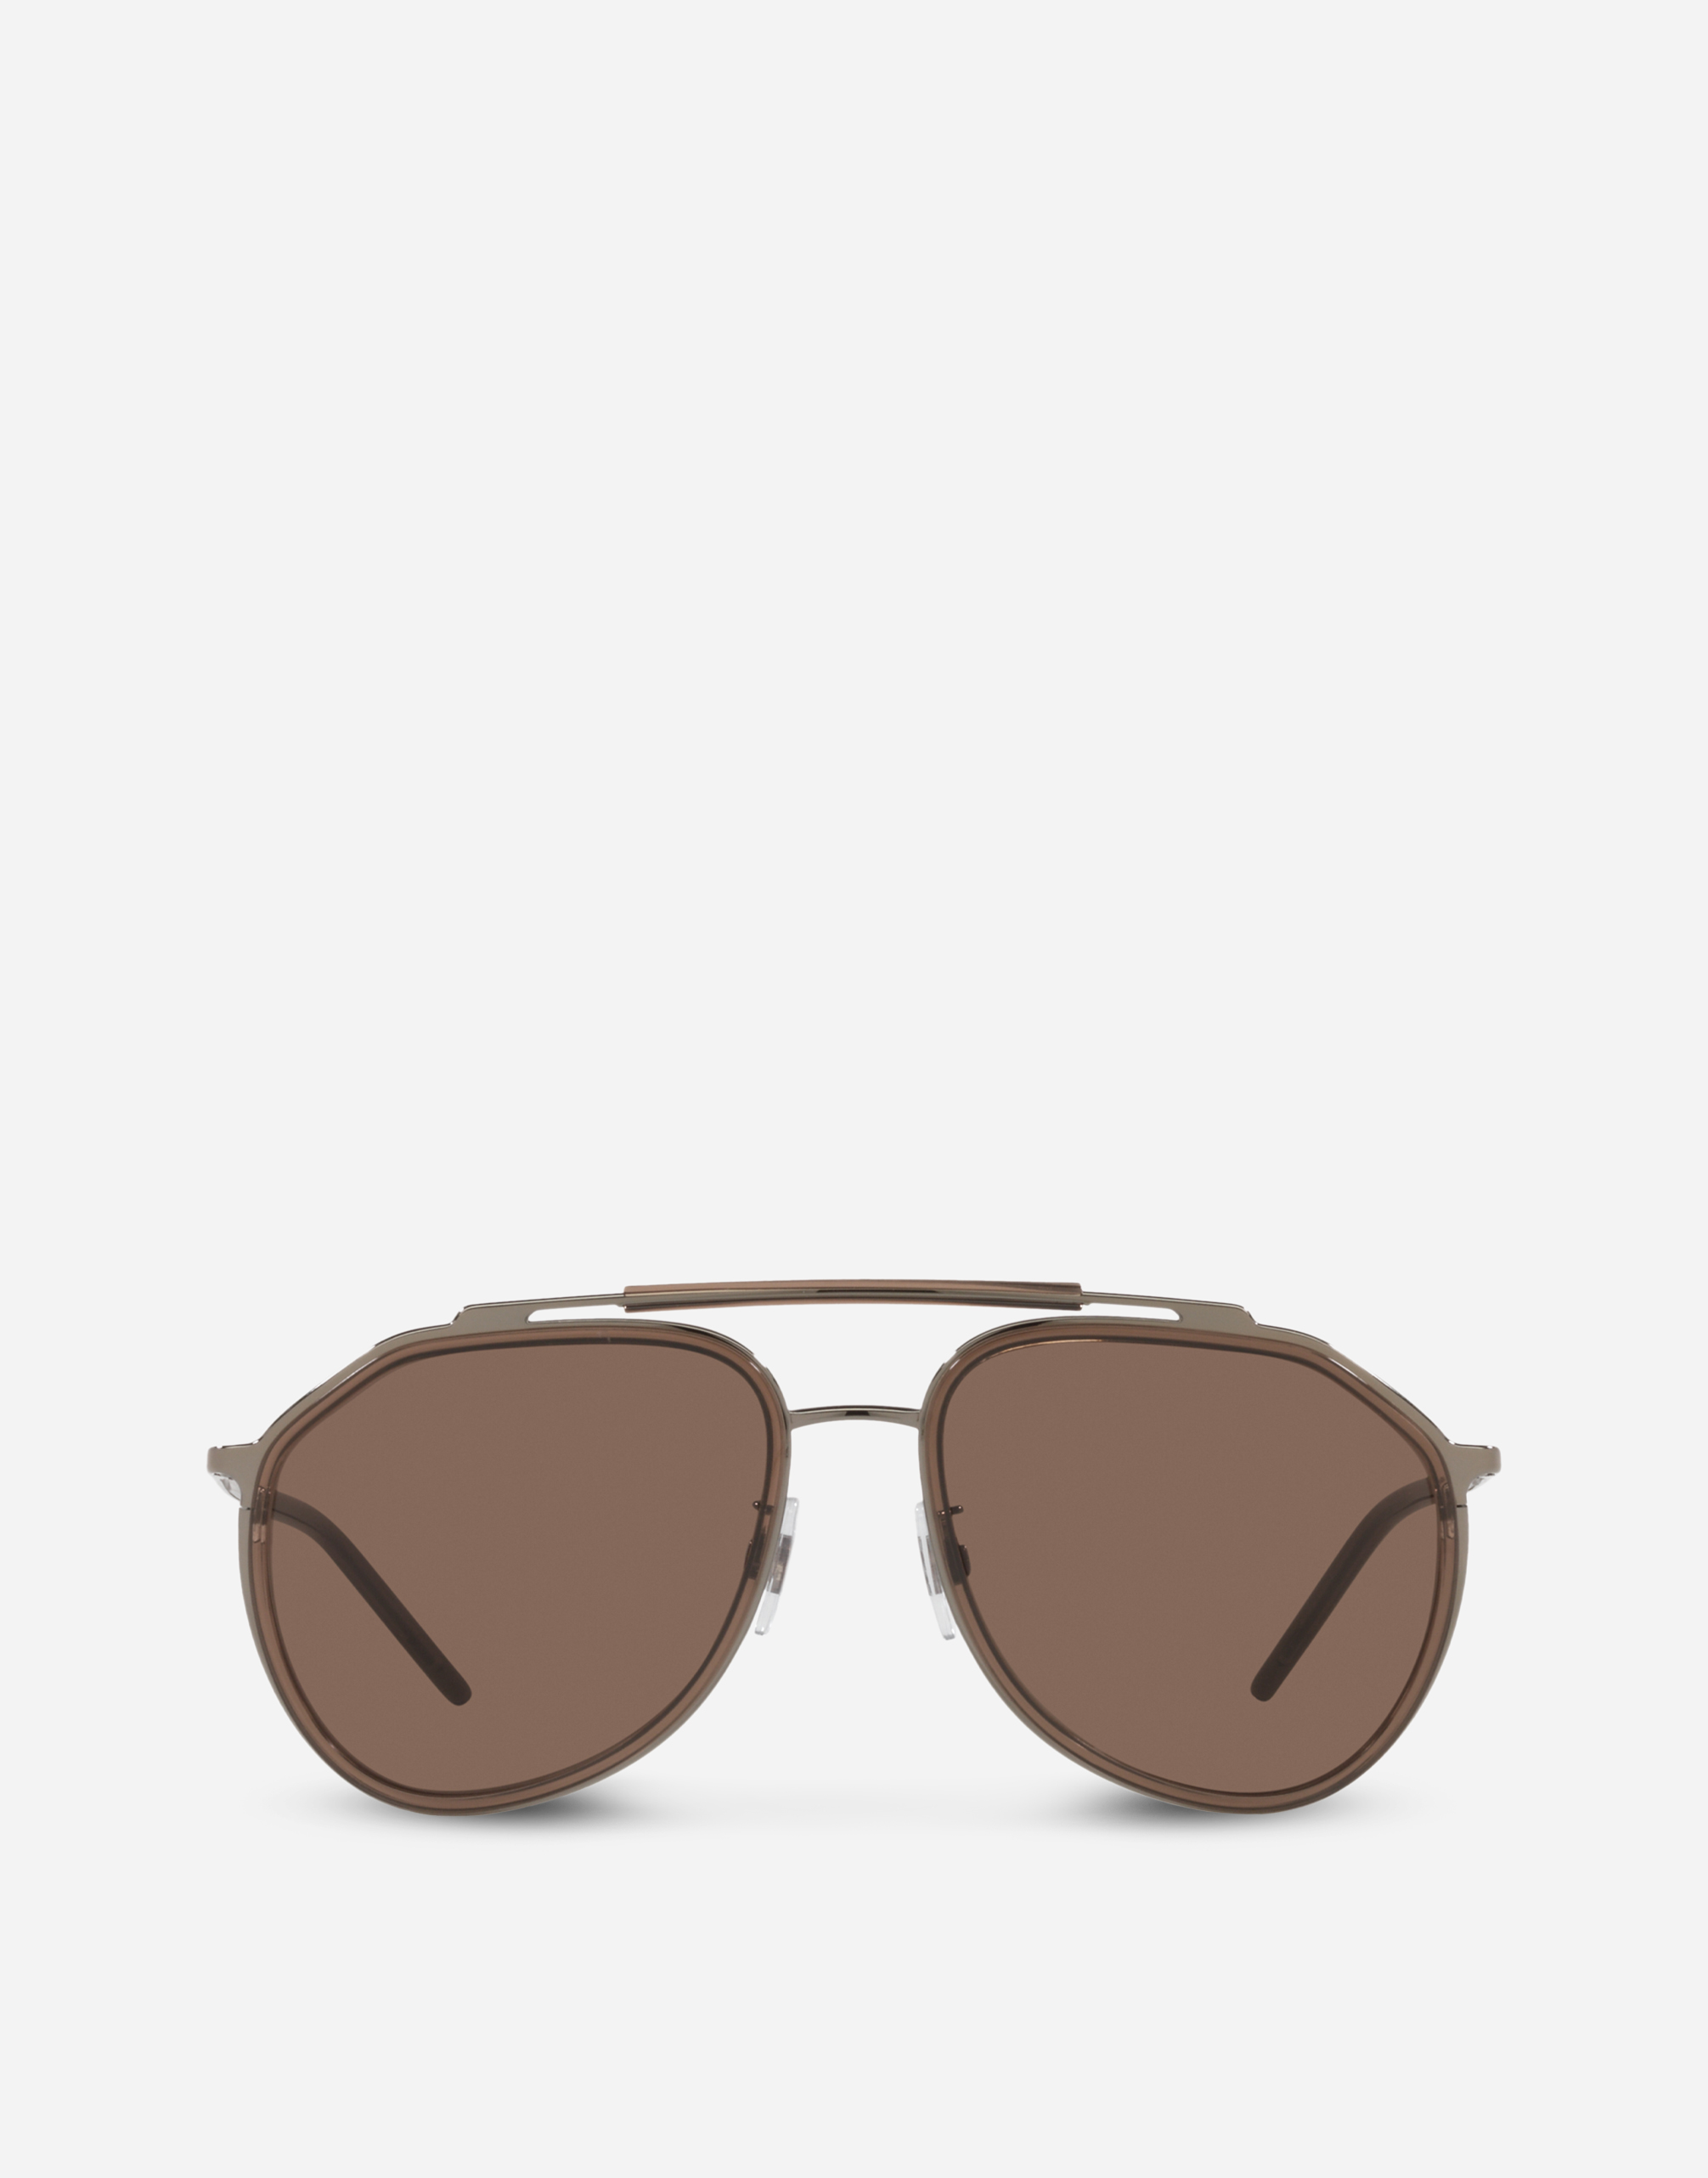 Madison sunglasses in Bronze and brown transparent